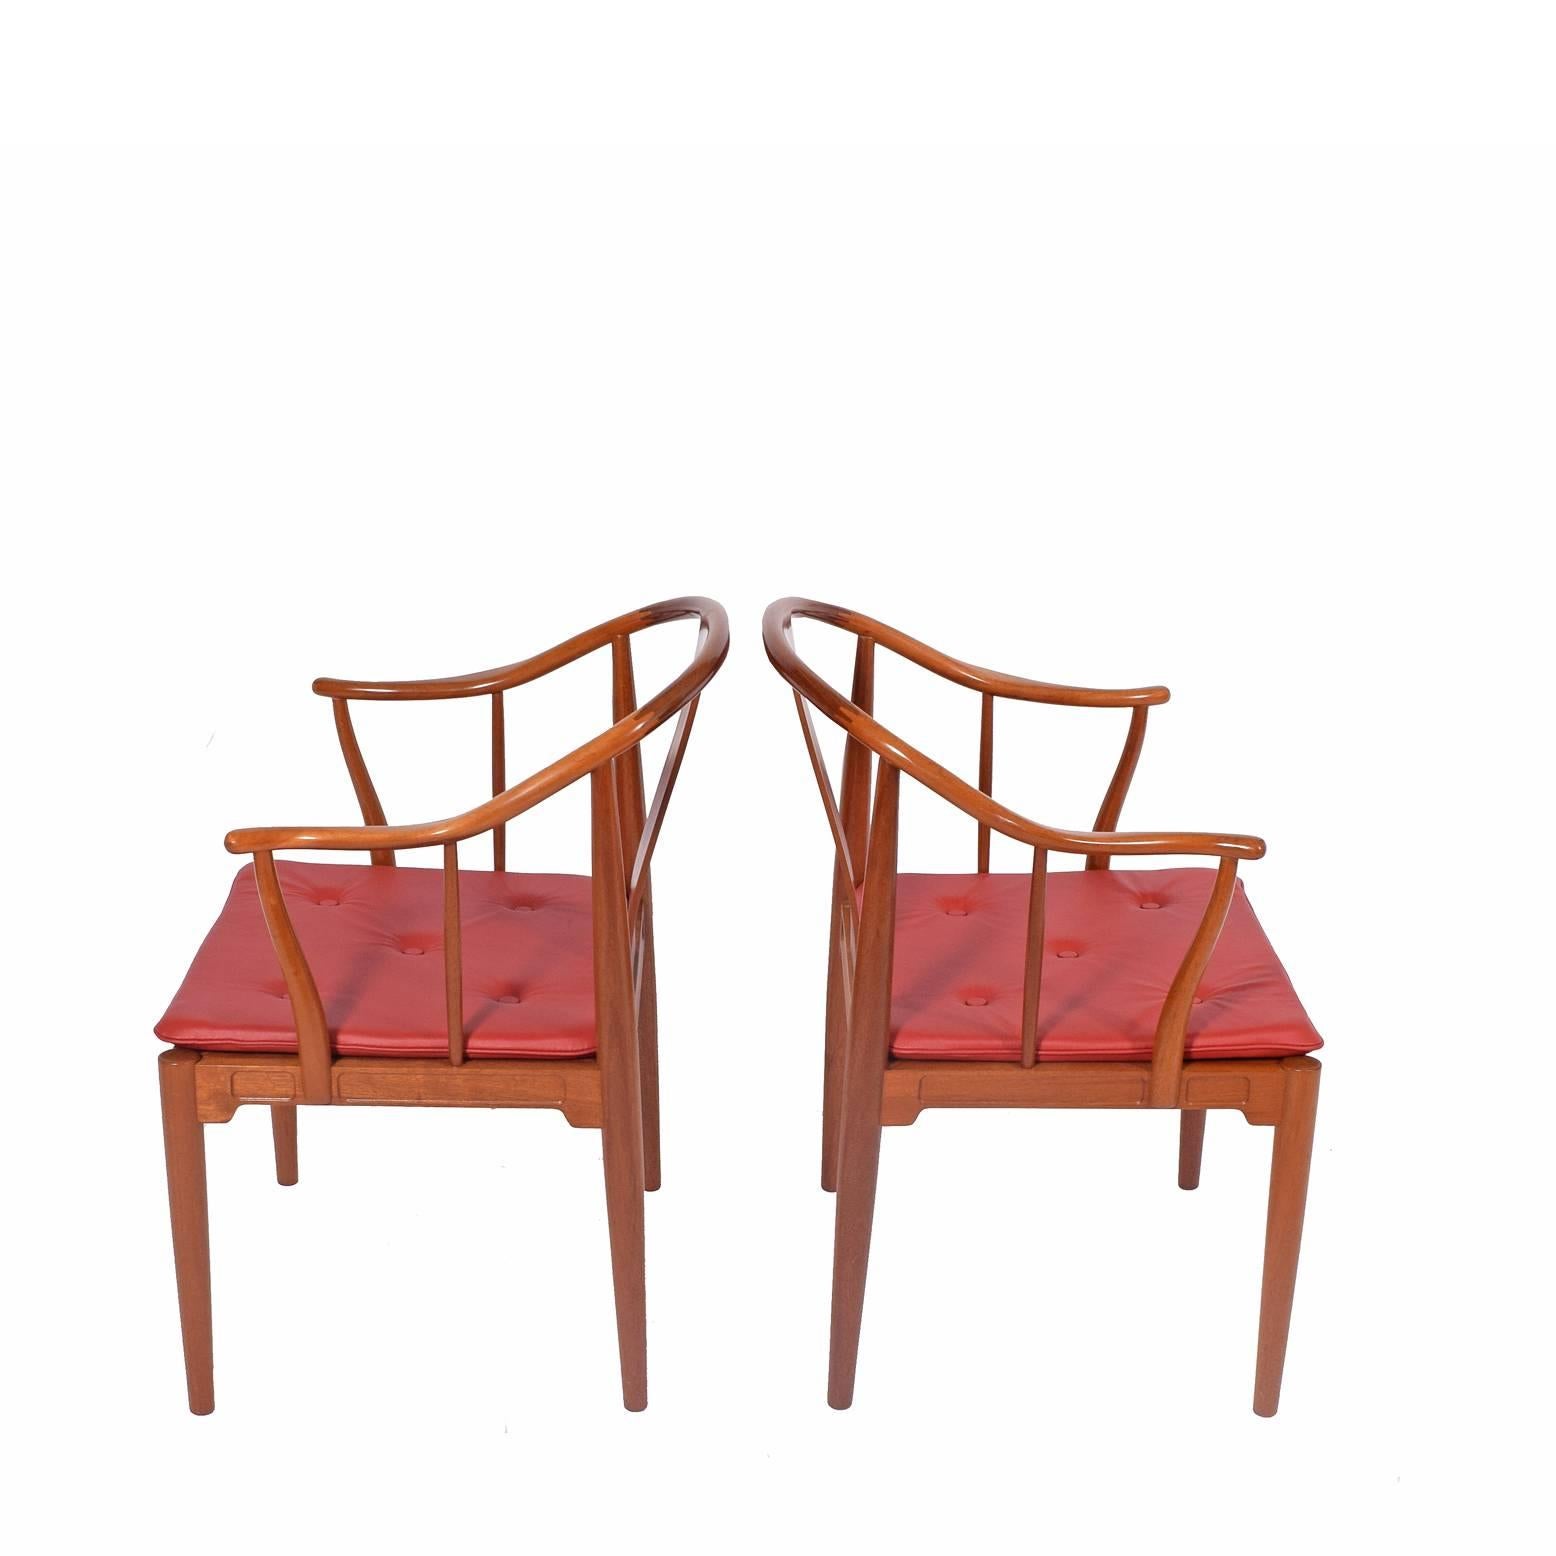 Solid mahogany armchairs with red leather cushions designed by Hans Wegner for Fritz Hansen in 1944. Inspiration came from a 1400 Chinese chair he saw in a museum.